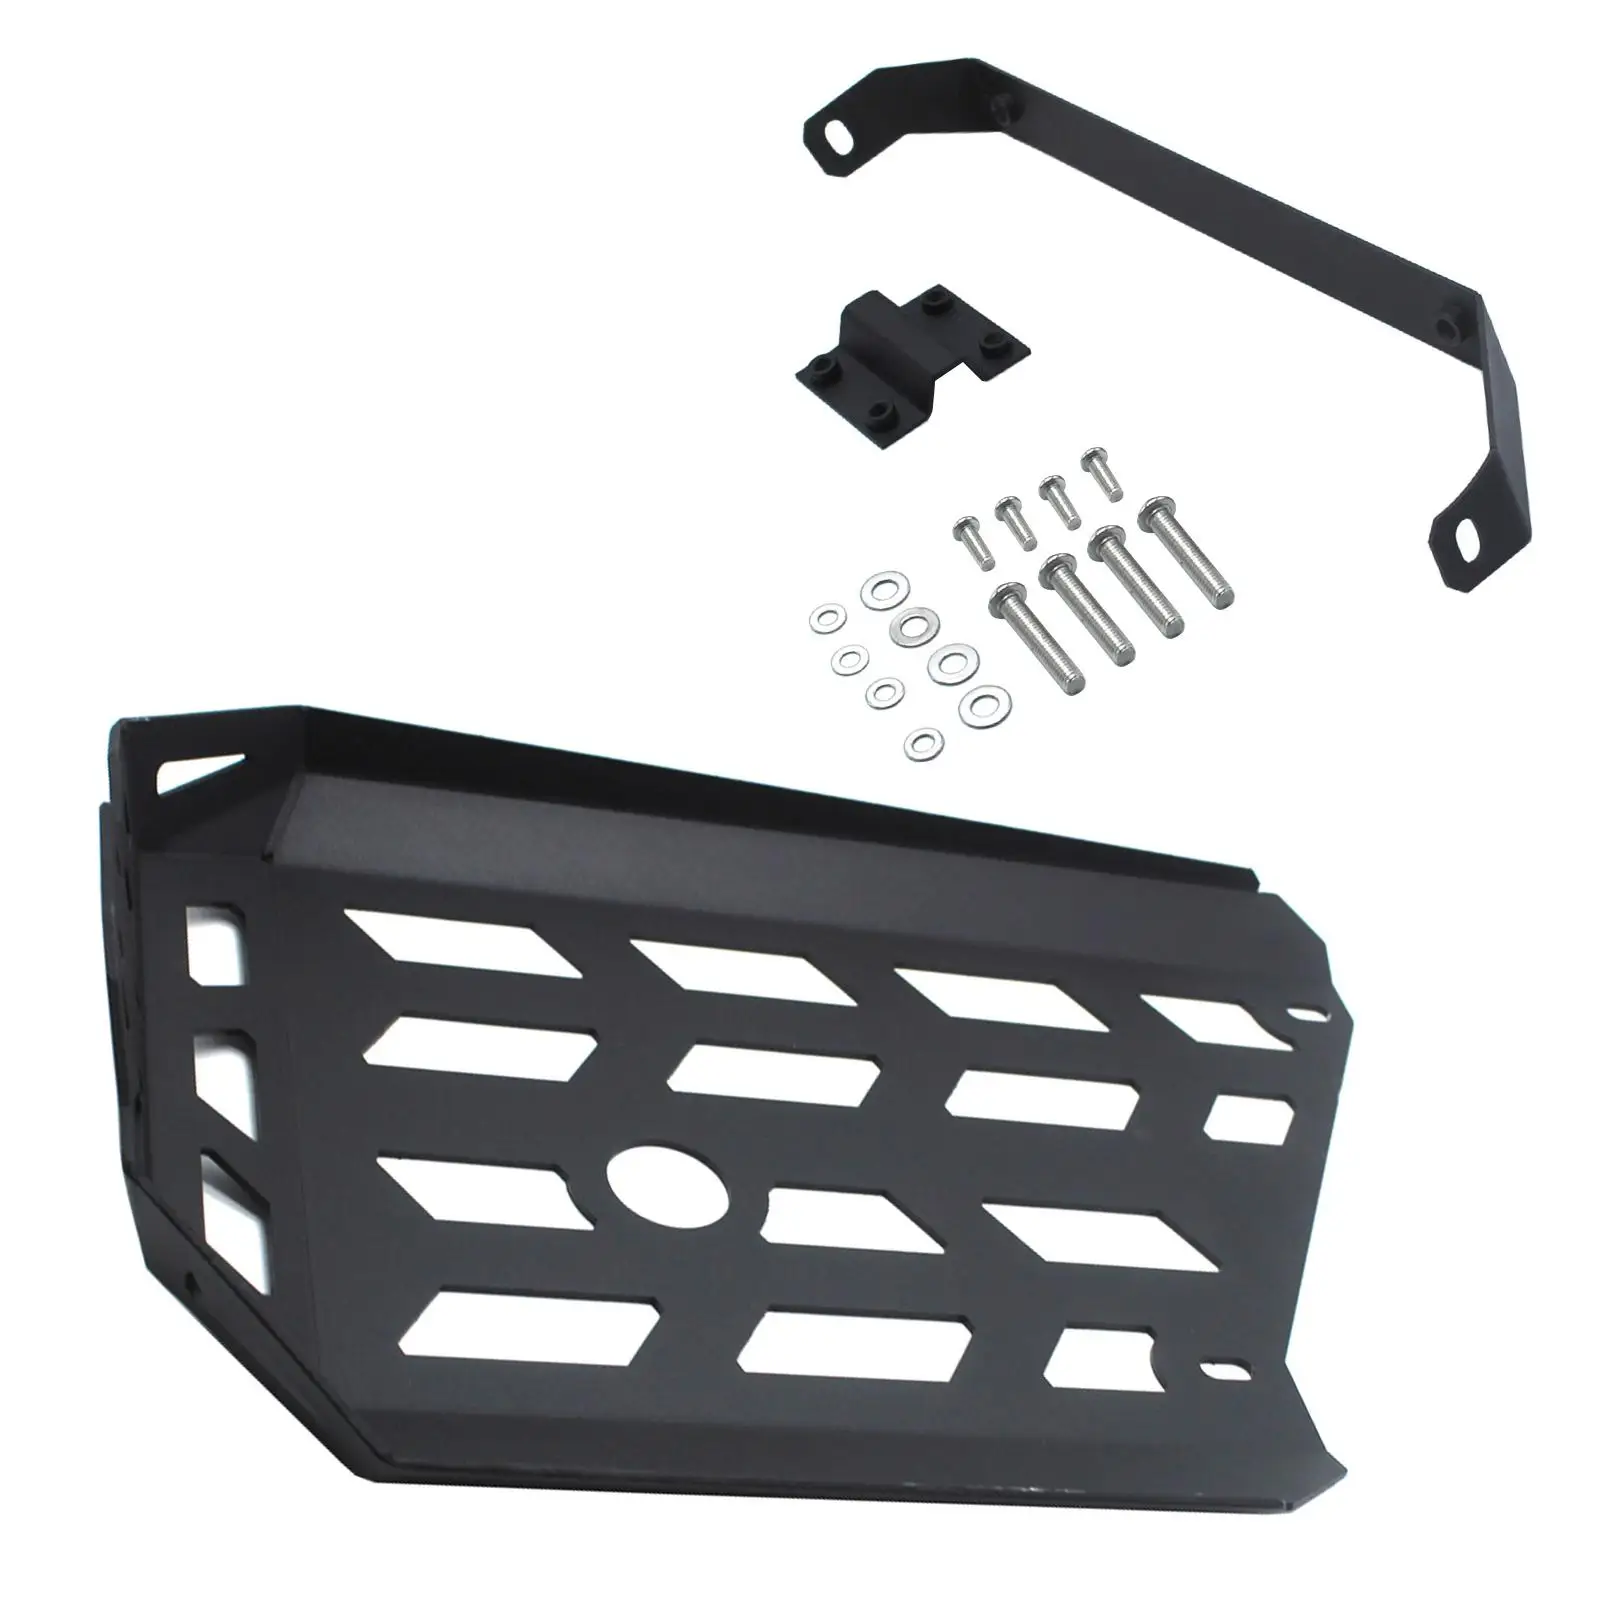 Engine Guard Cover Protector Skid Board Belly Pan for Suzuki V Strom